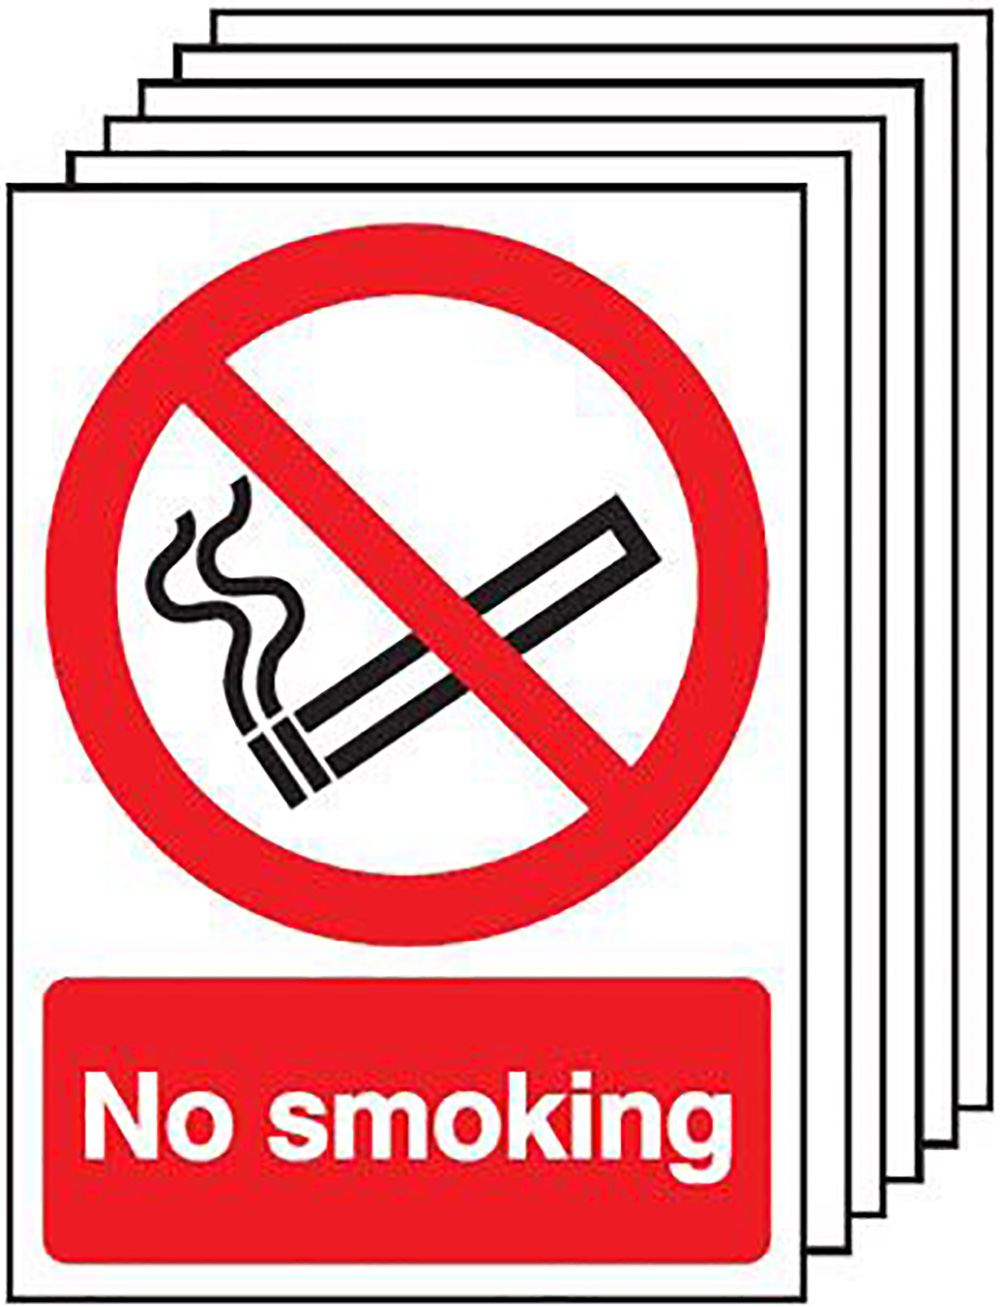 No Smoking    210x148mm Self Adhesive Vinyl Safety Sign Pack of 6 